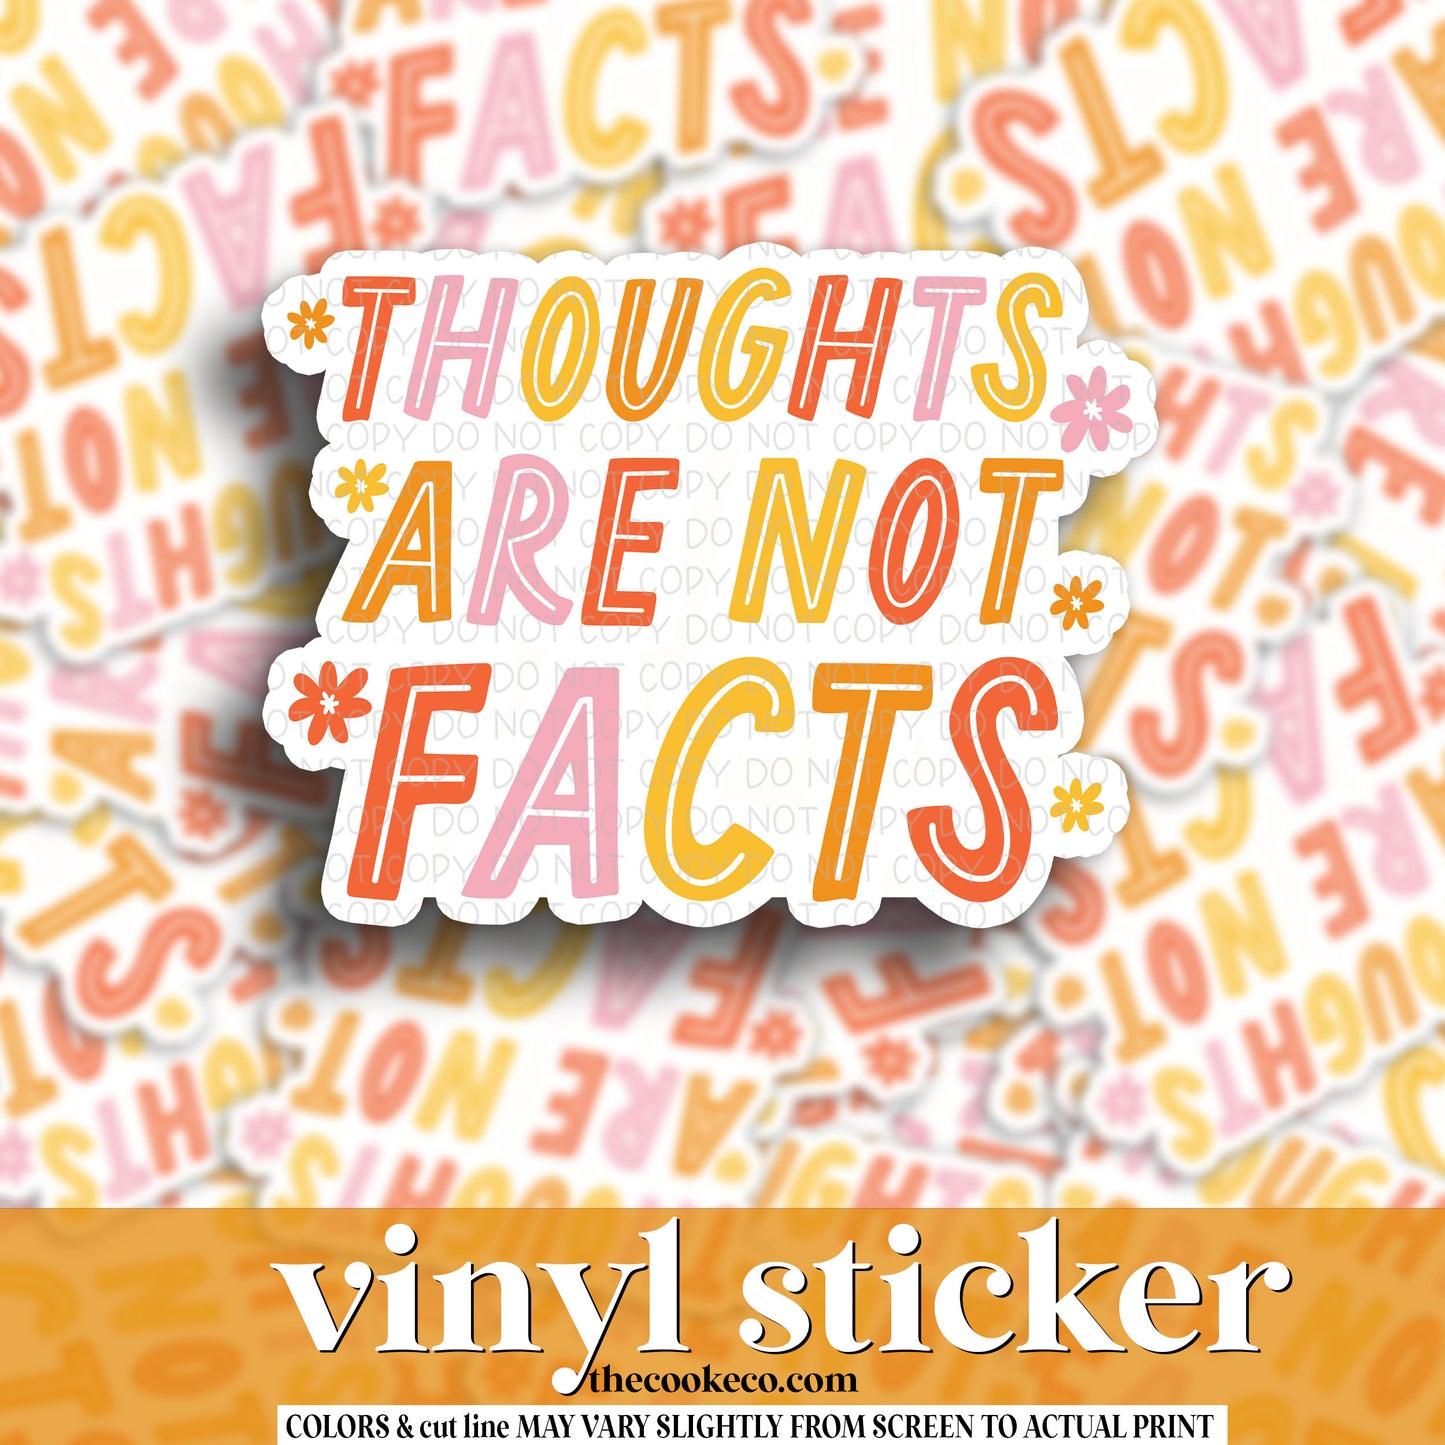 Vinyl Sticker | #V1110 - THOUGHTS ARE NOT FACTS